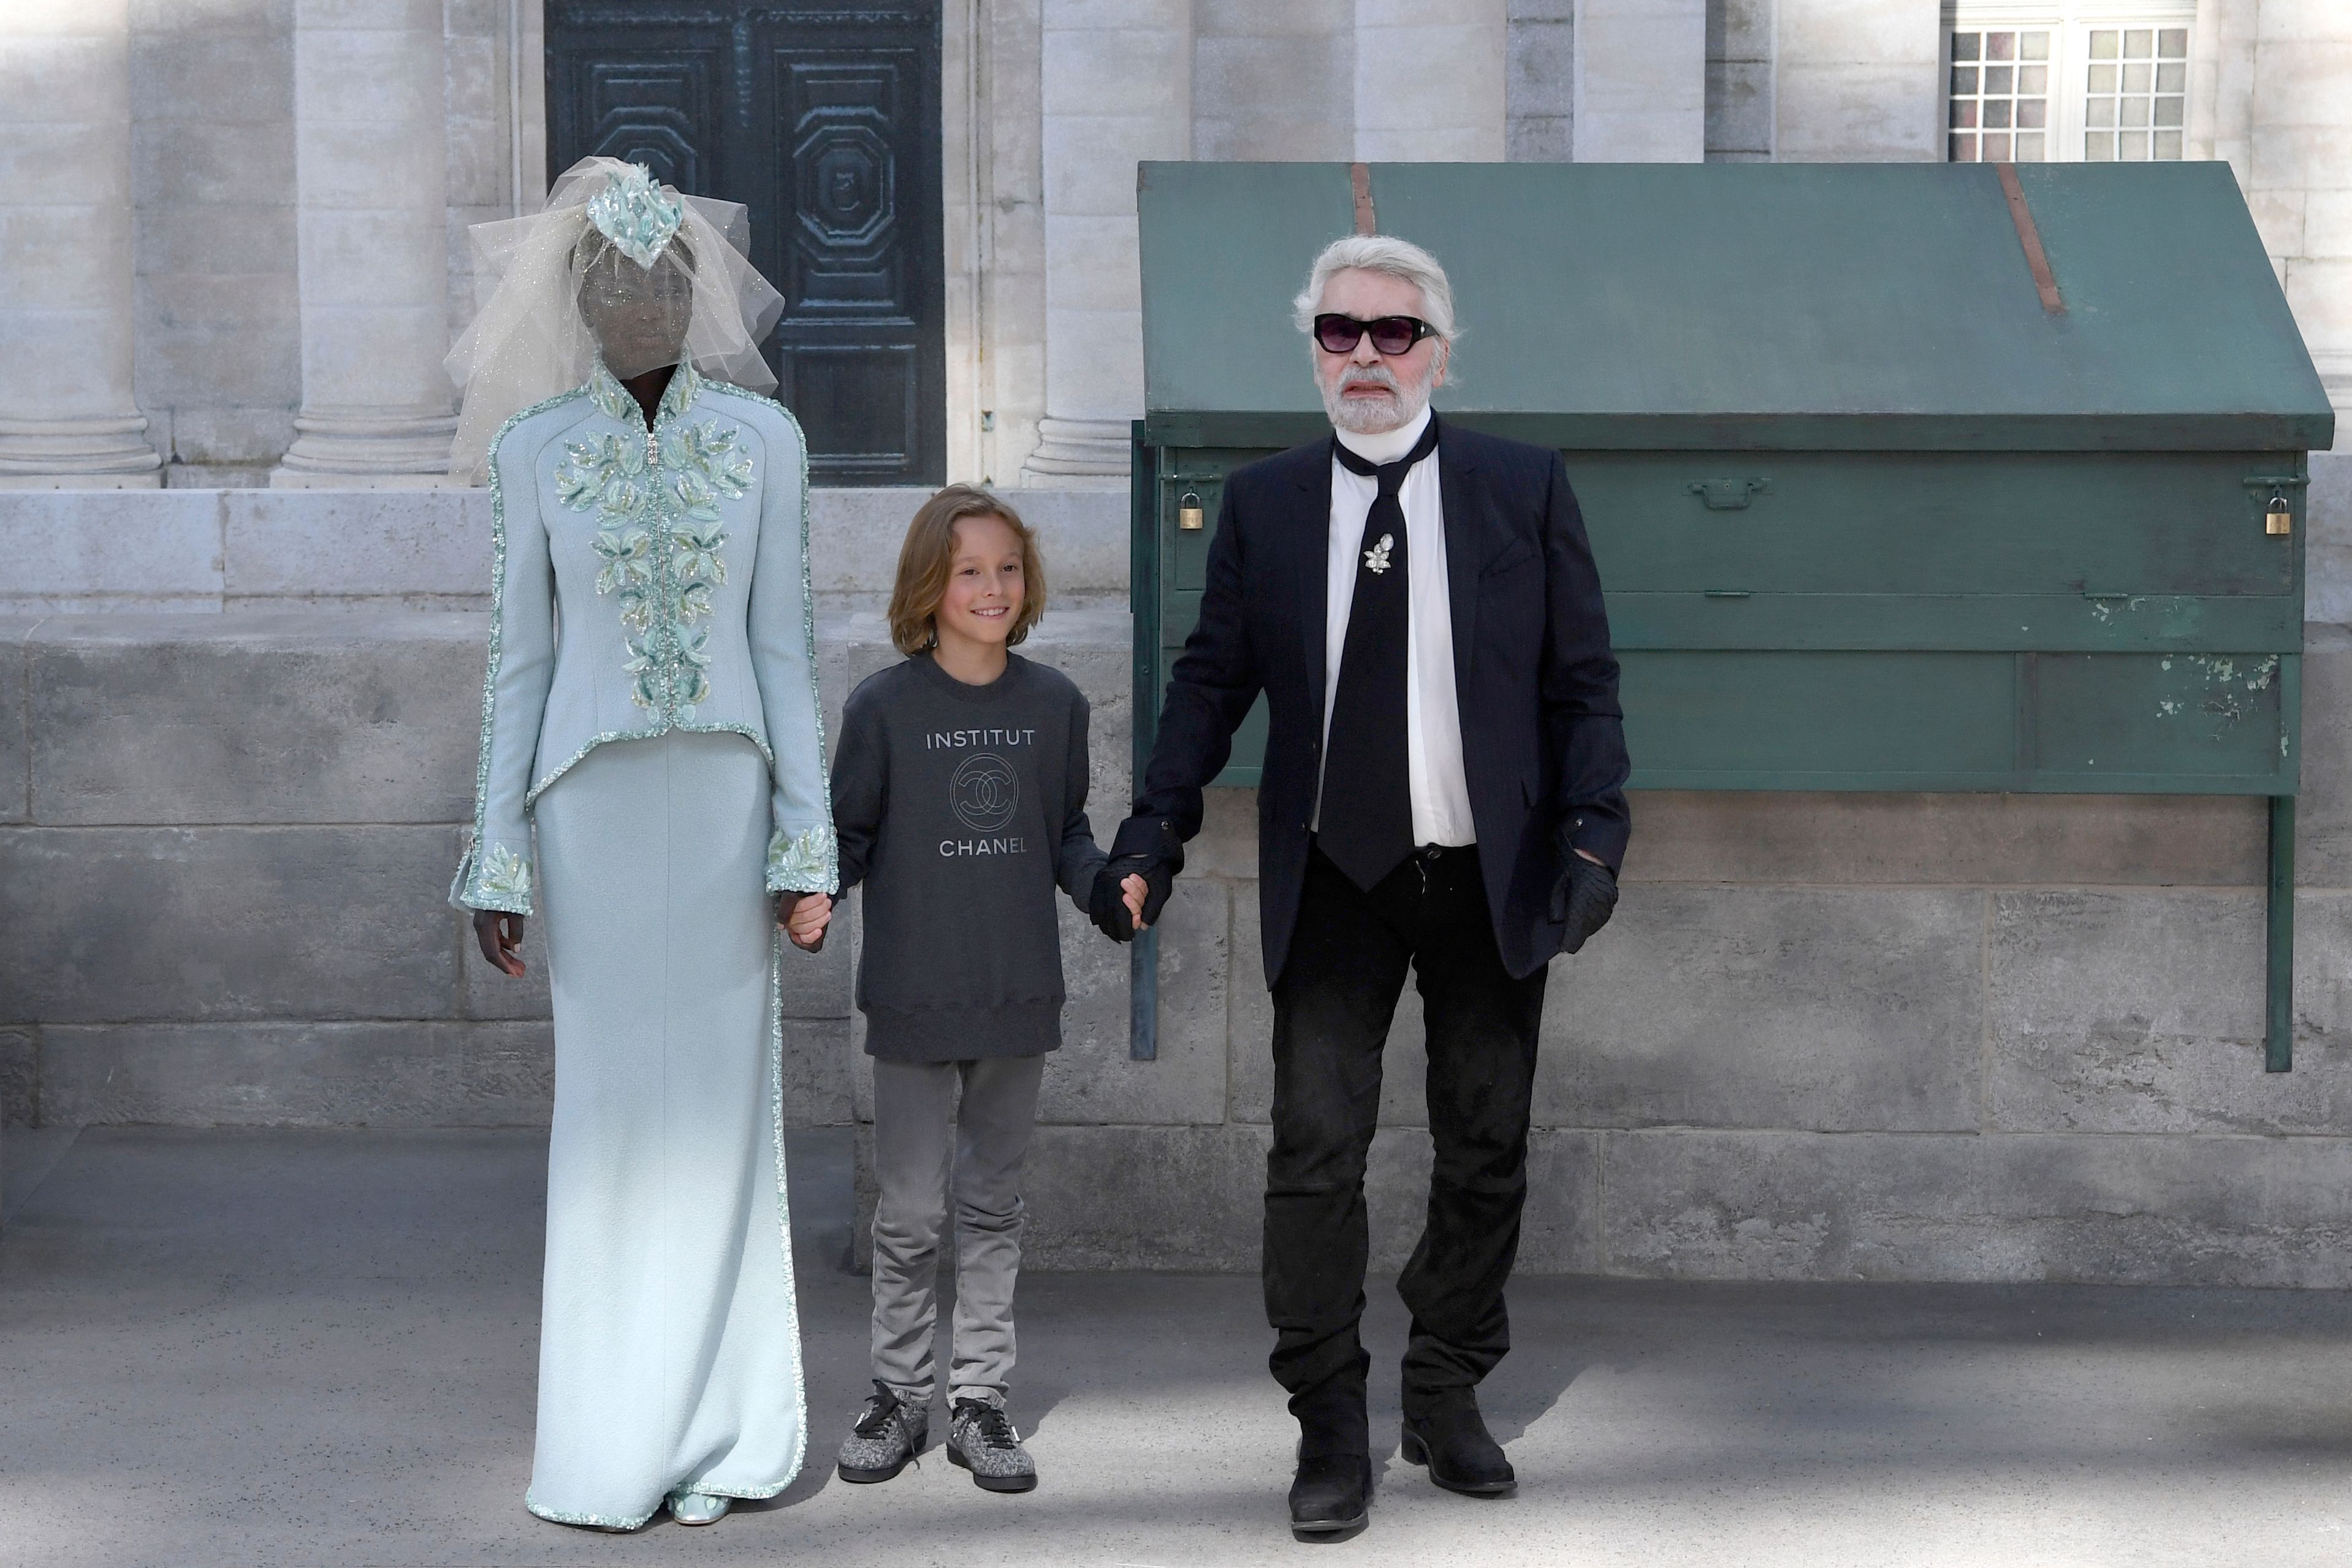 Karl Lagerfeld Takes Us Into the World of Chanel in New Netflix